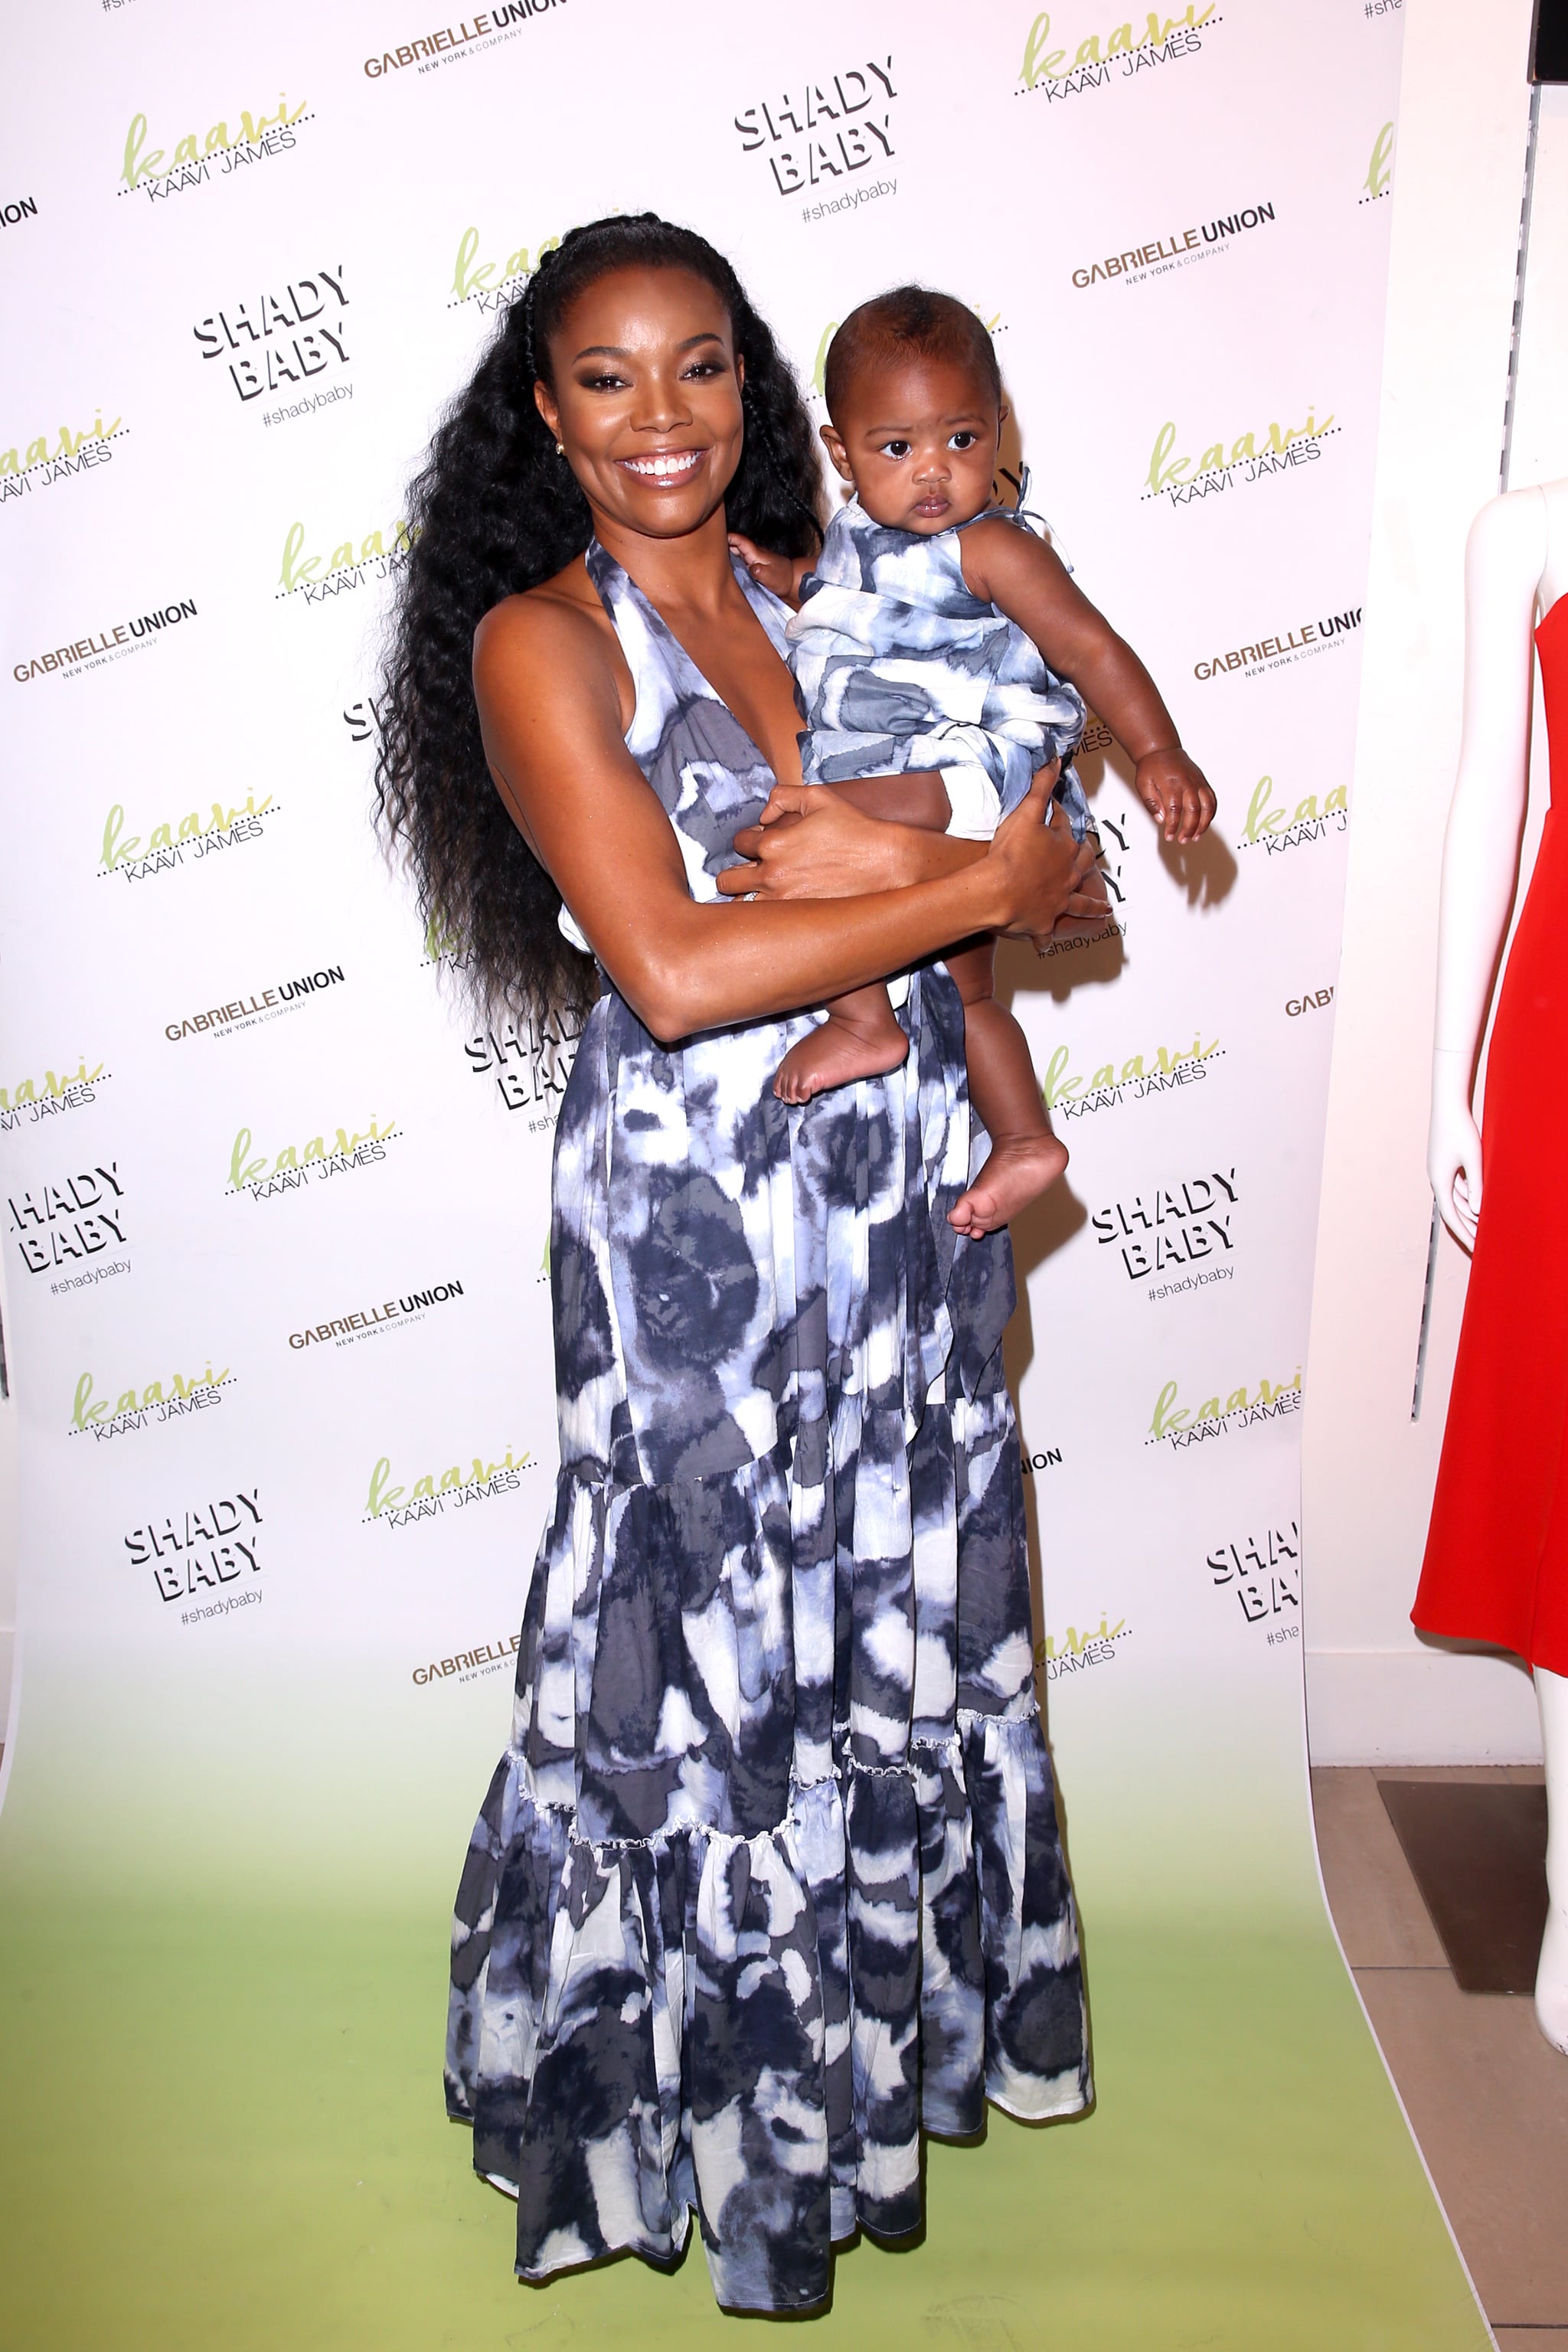 BURBANK, CALIFORNIA - MAY 09: (L-R) Gabrielle Union and Kaavia James Union Wade visit New York & Company Store in Burbank, CA to launch Kaavi James Collection on May 09, 2019. (Photo by Jesse Grant/Getty Images for New York & Company)